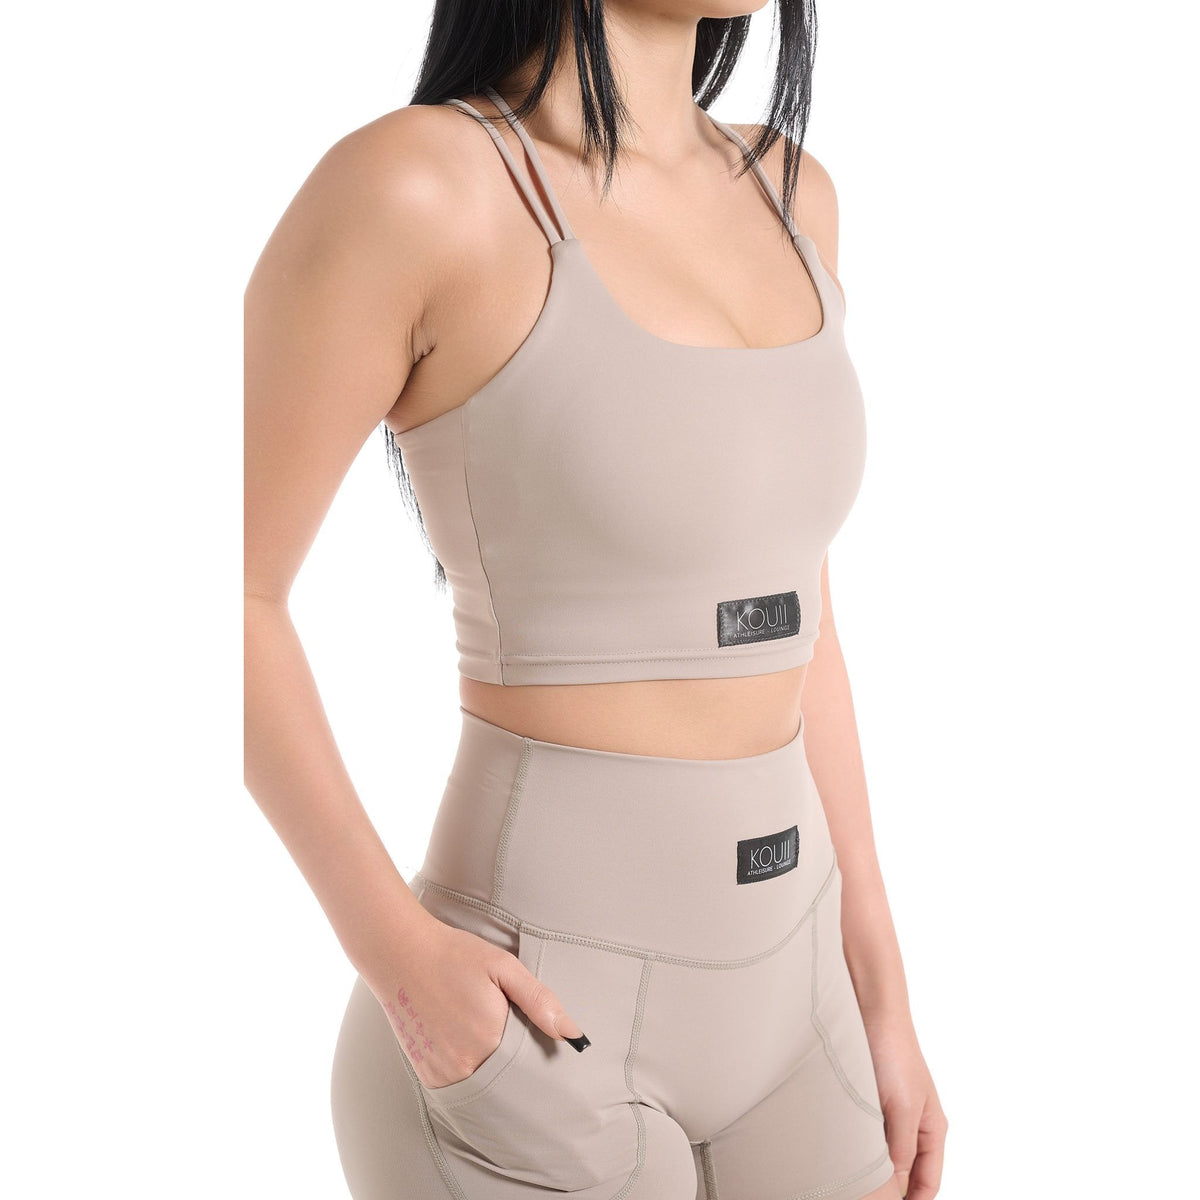 Stay comfortable and stylish with Caitefaso Womens Lounge Athletic